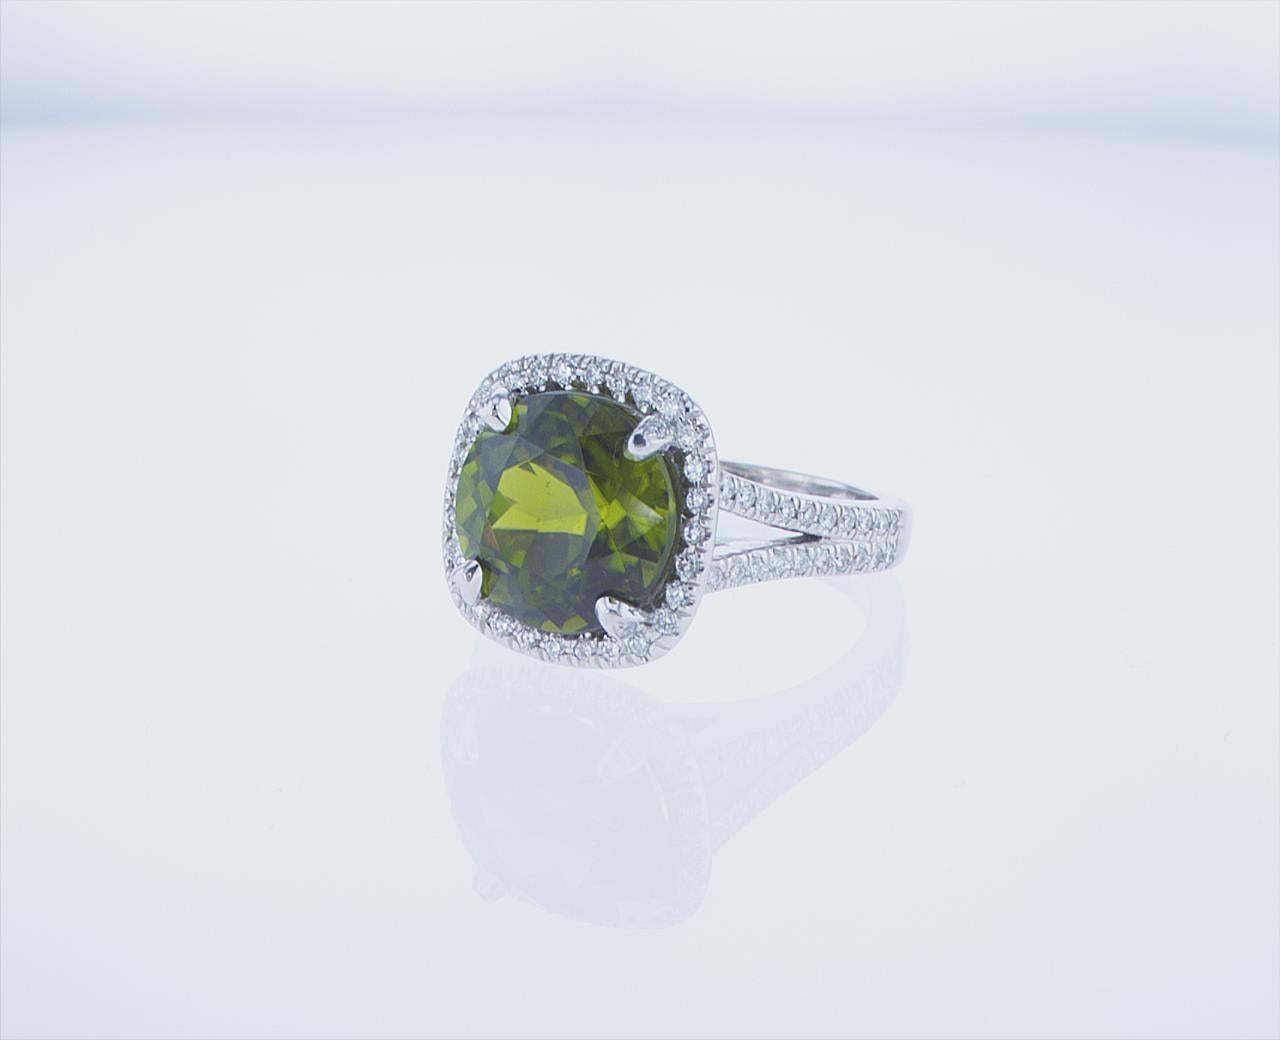 6.38 Carat Cushion Peridot cocktail ring featuring a 0.45 Carats total weight of G/H Color, VS Clarity Round Brilliant Diamonds. 18k White Gold with Palldium mounting.